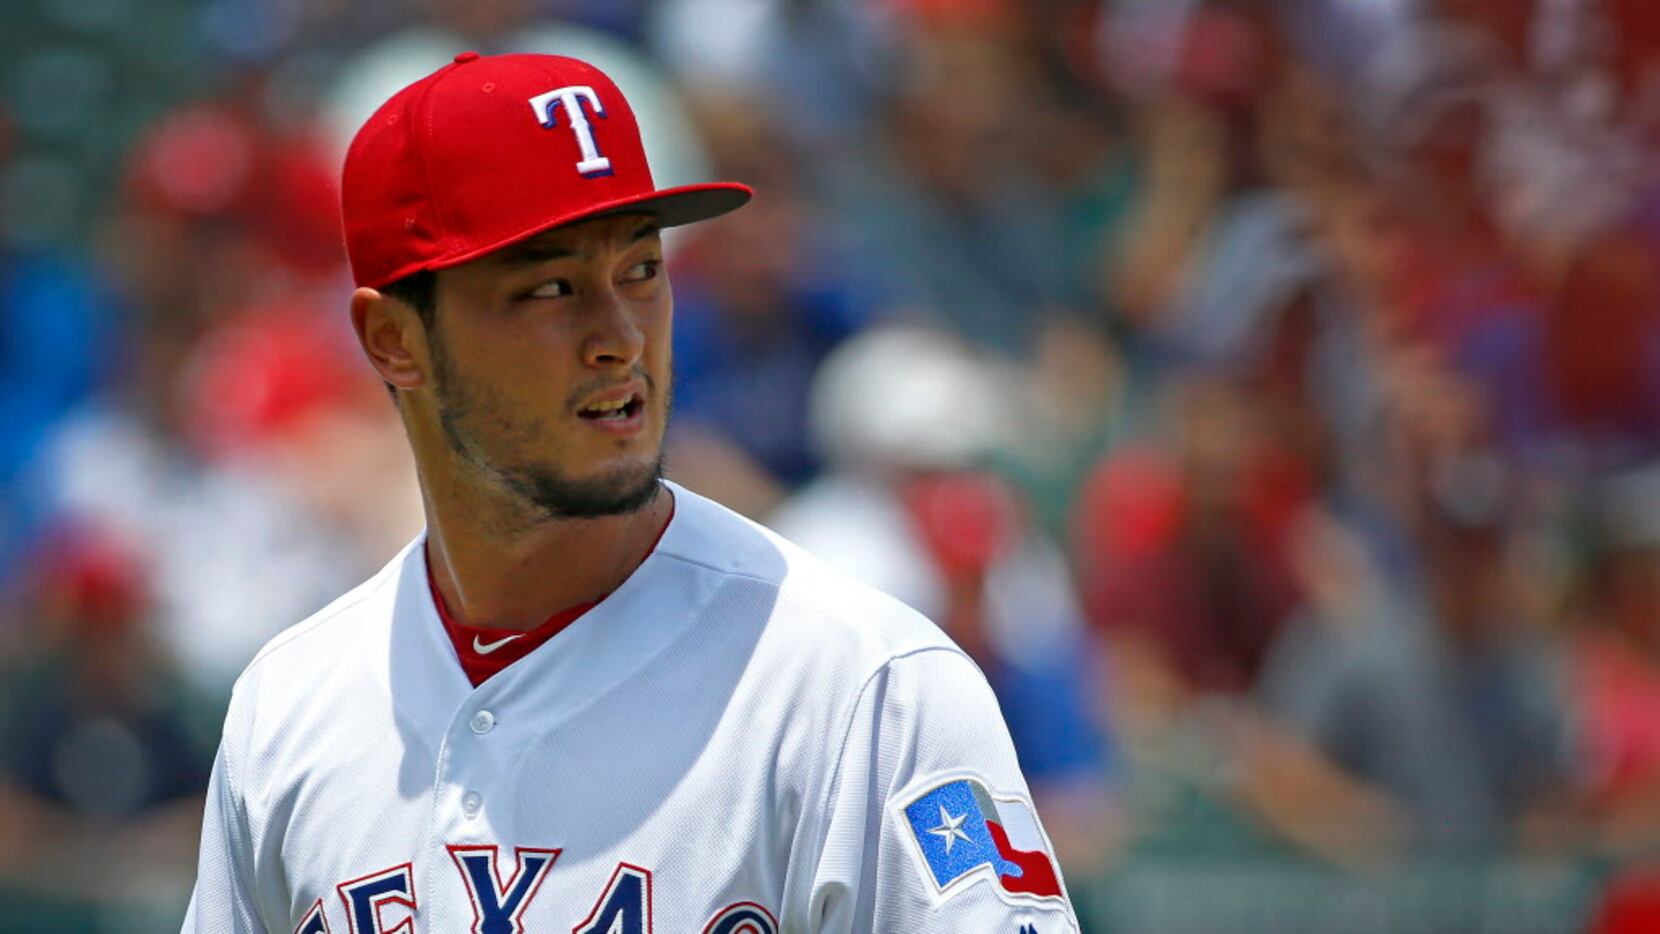 With Yu Darvish signing, National League tilts in Cubs' favor